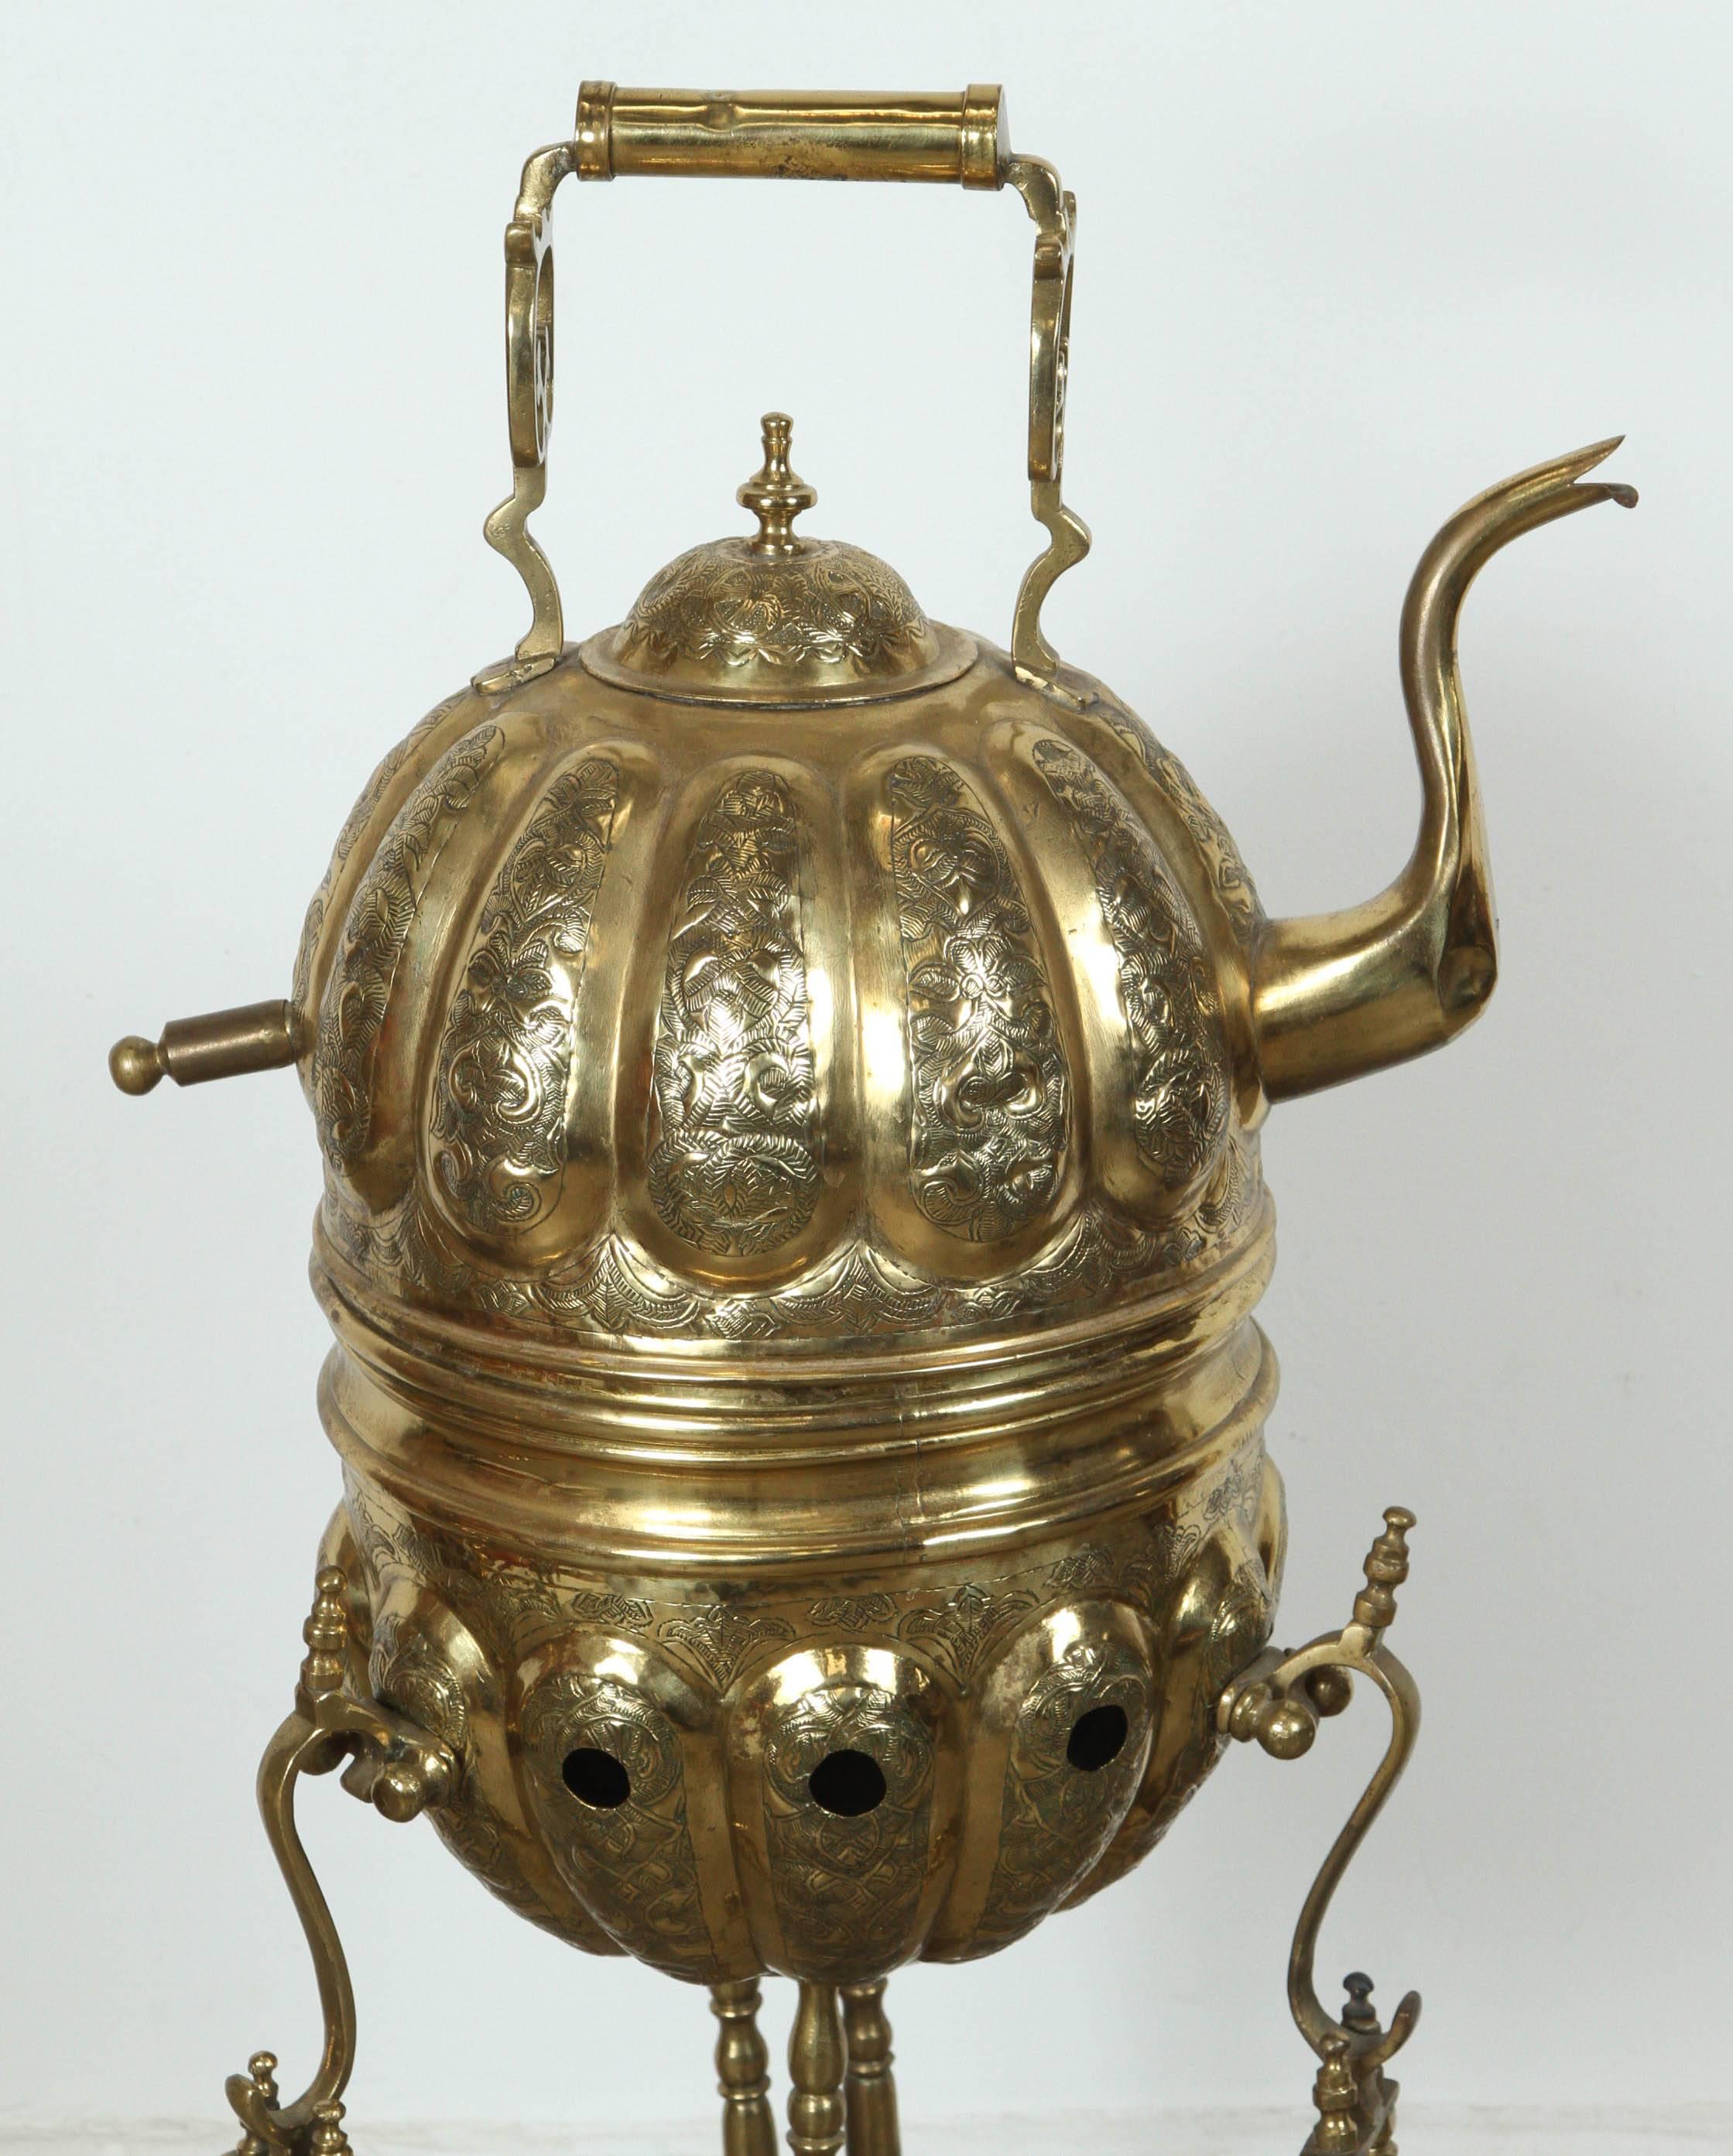 Moroccan Brass Tea Kettle on Stand Handcrafted in Fez Morocco In Good Condition For Sale In North Hollywood, CA